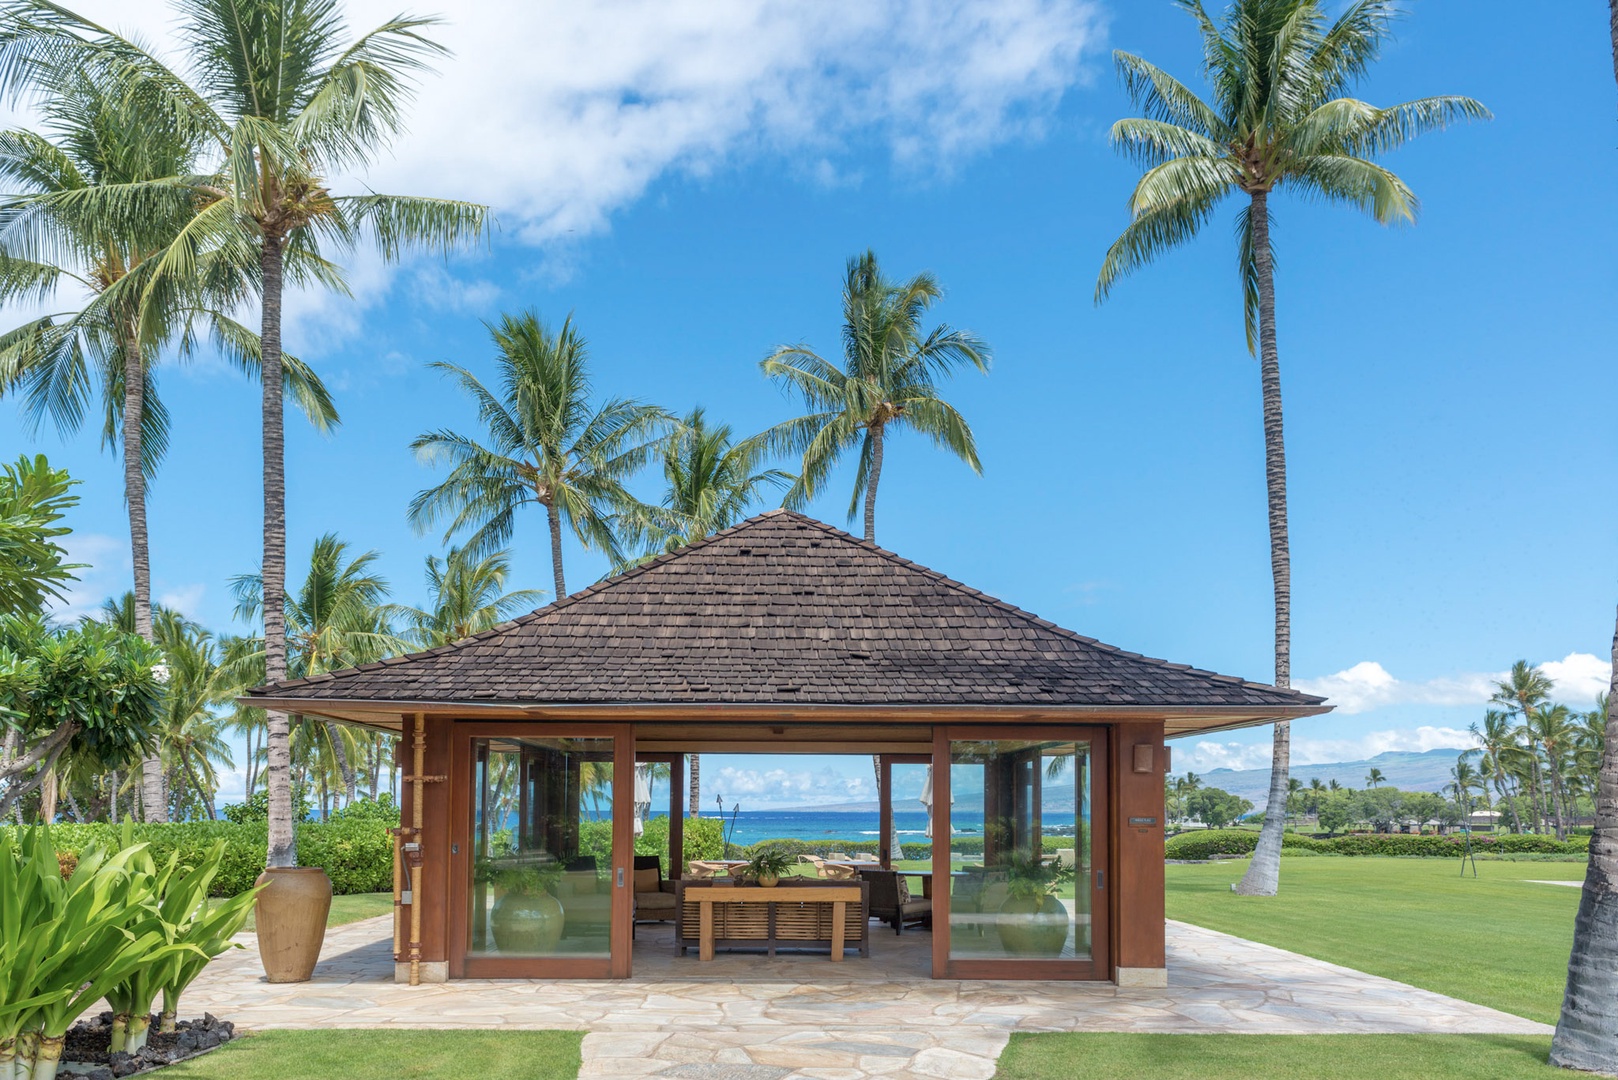 Kamuela Vacation Rentals, 3BD Na Hale 3 at Pauoa Beach Club at Mauna Lani Resort - Pauoa Beach Club offers a welcoming concierge desk and relaxing shaded lounge